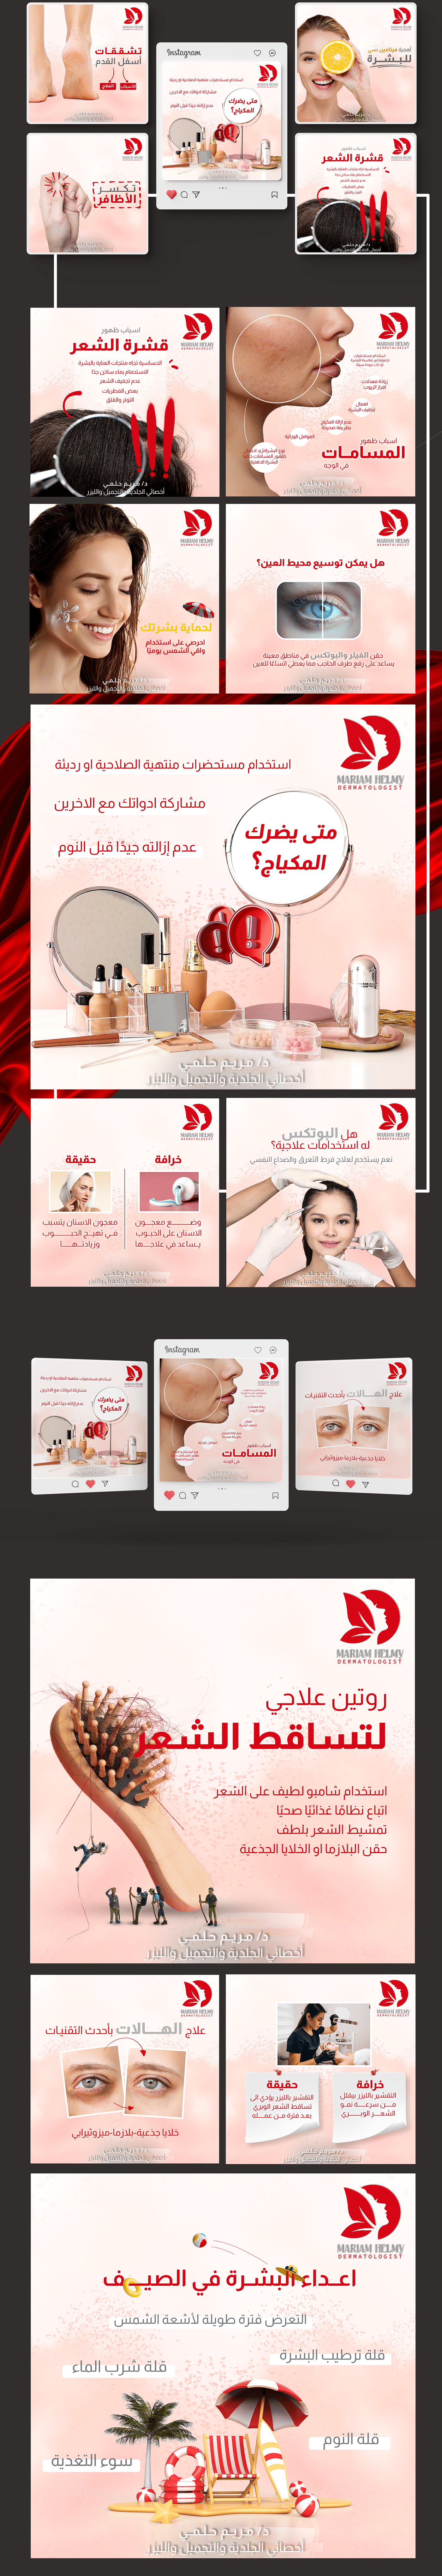 Advertising  beauty clinic skin care social media therapist therapy woman